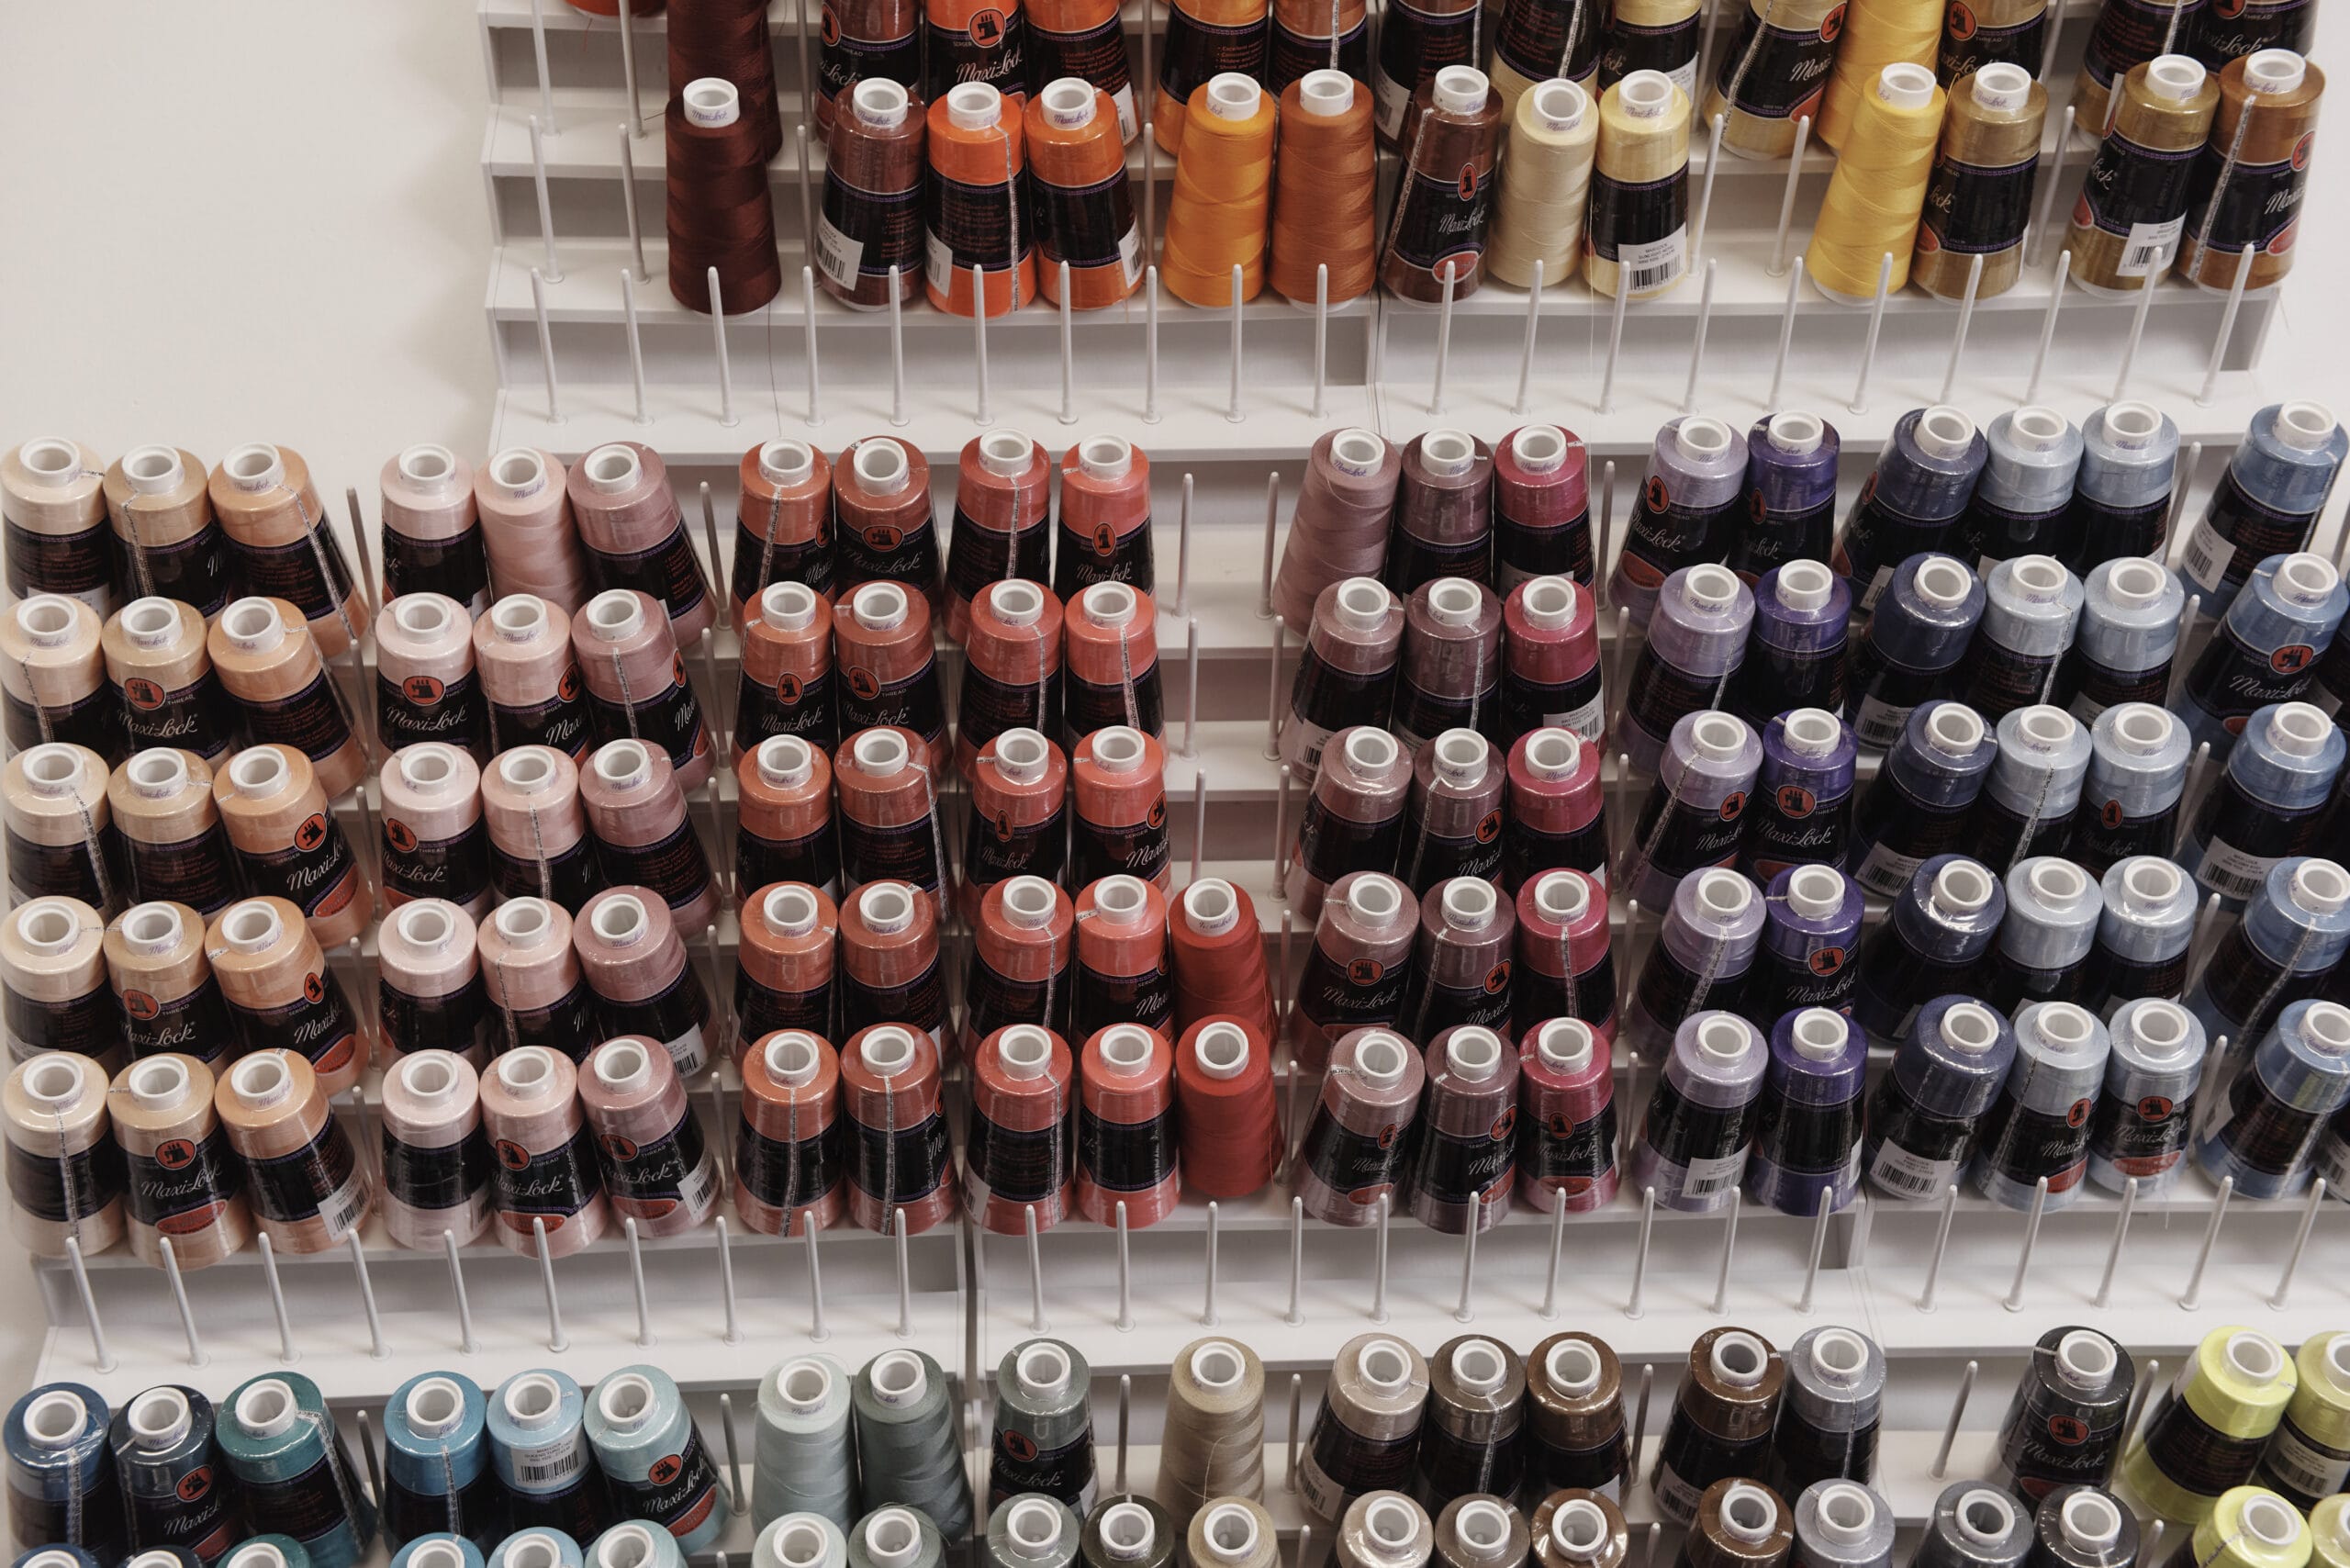 A wall of organized thread spools, arranged by color.